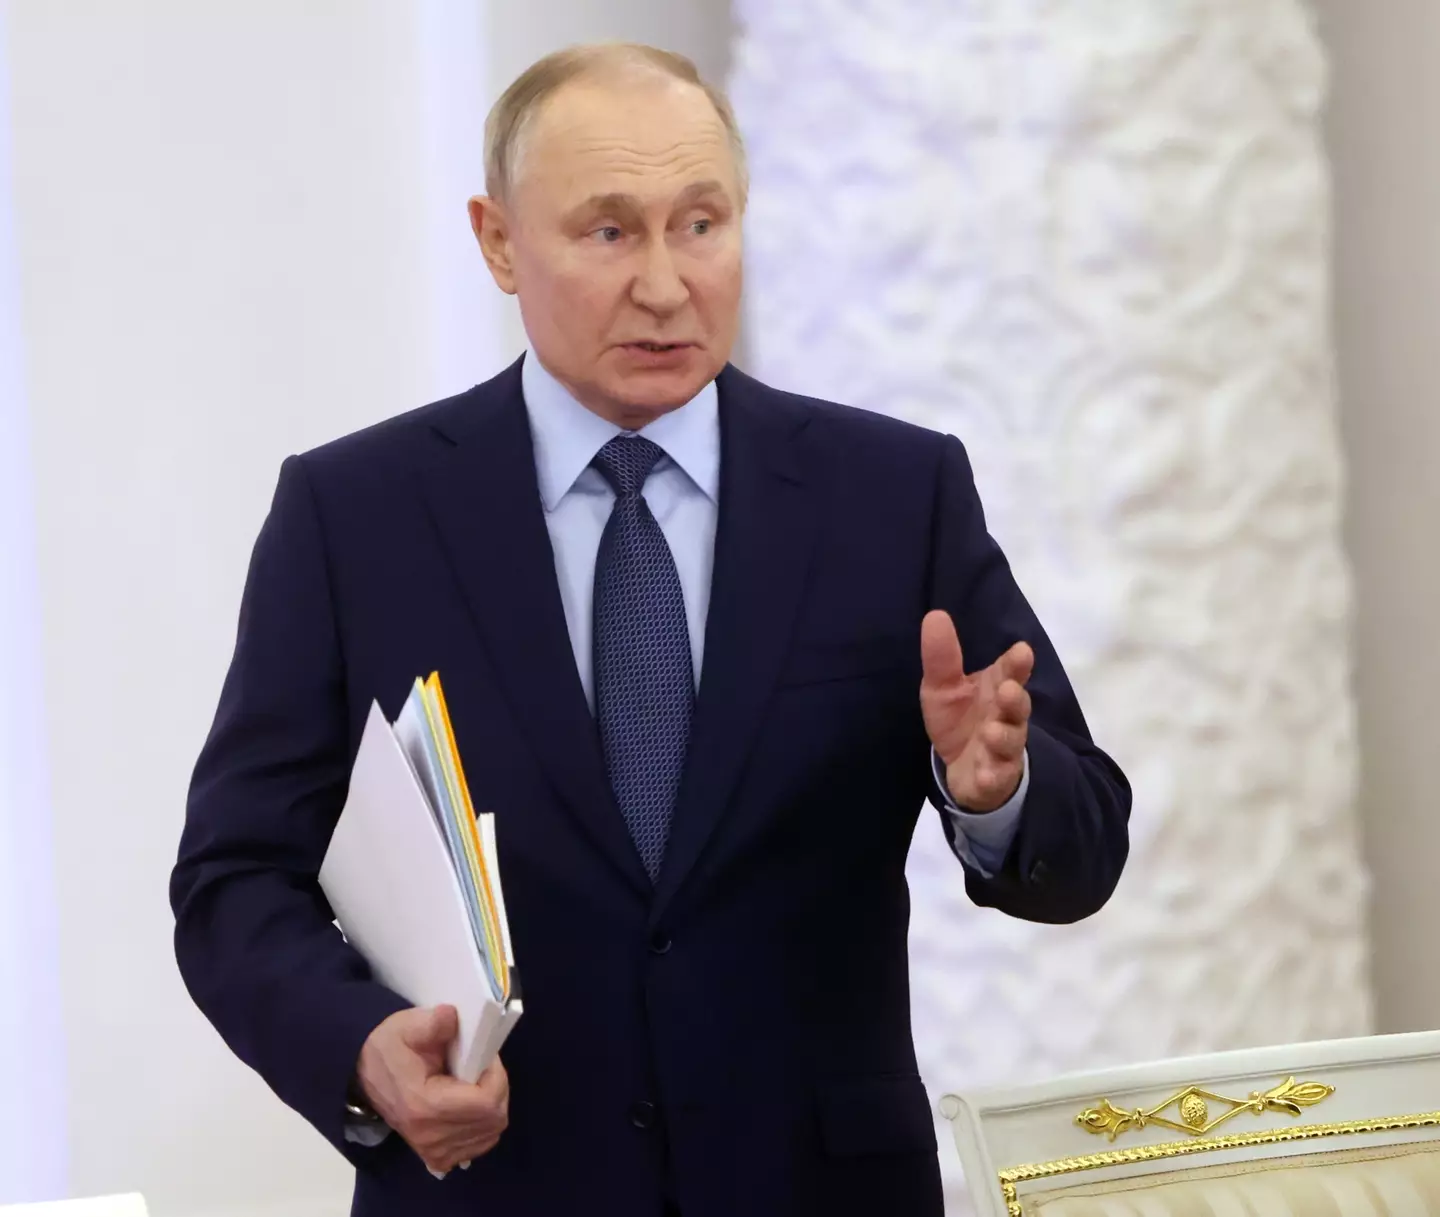 Russian President Vladimir Putin is among her predictions for this year.